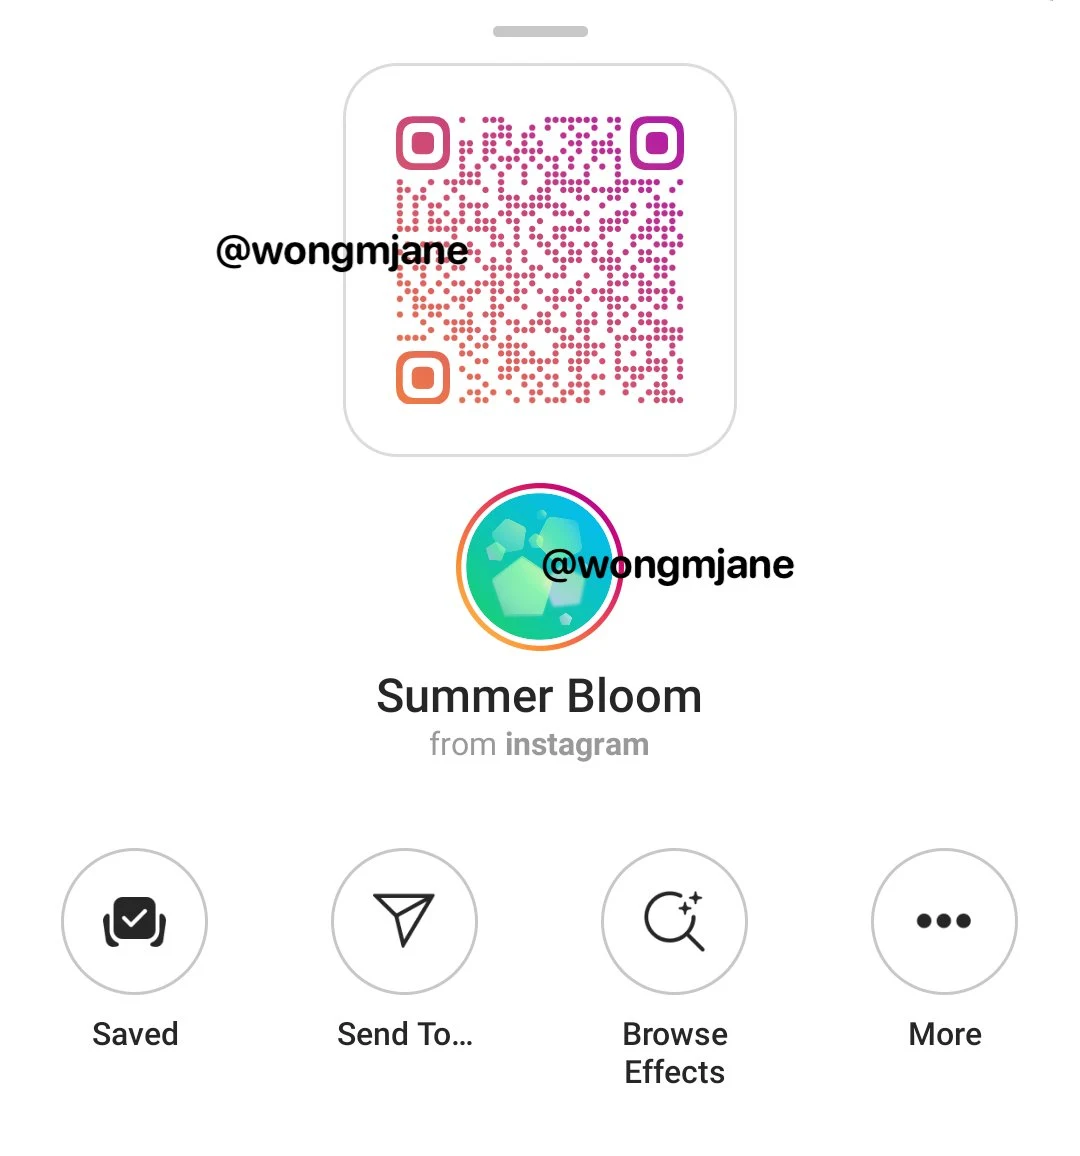 Instagram is working on Effect Stories and Effect QR Codes